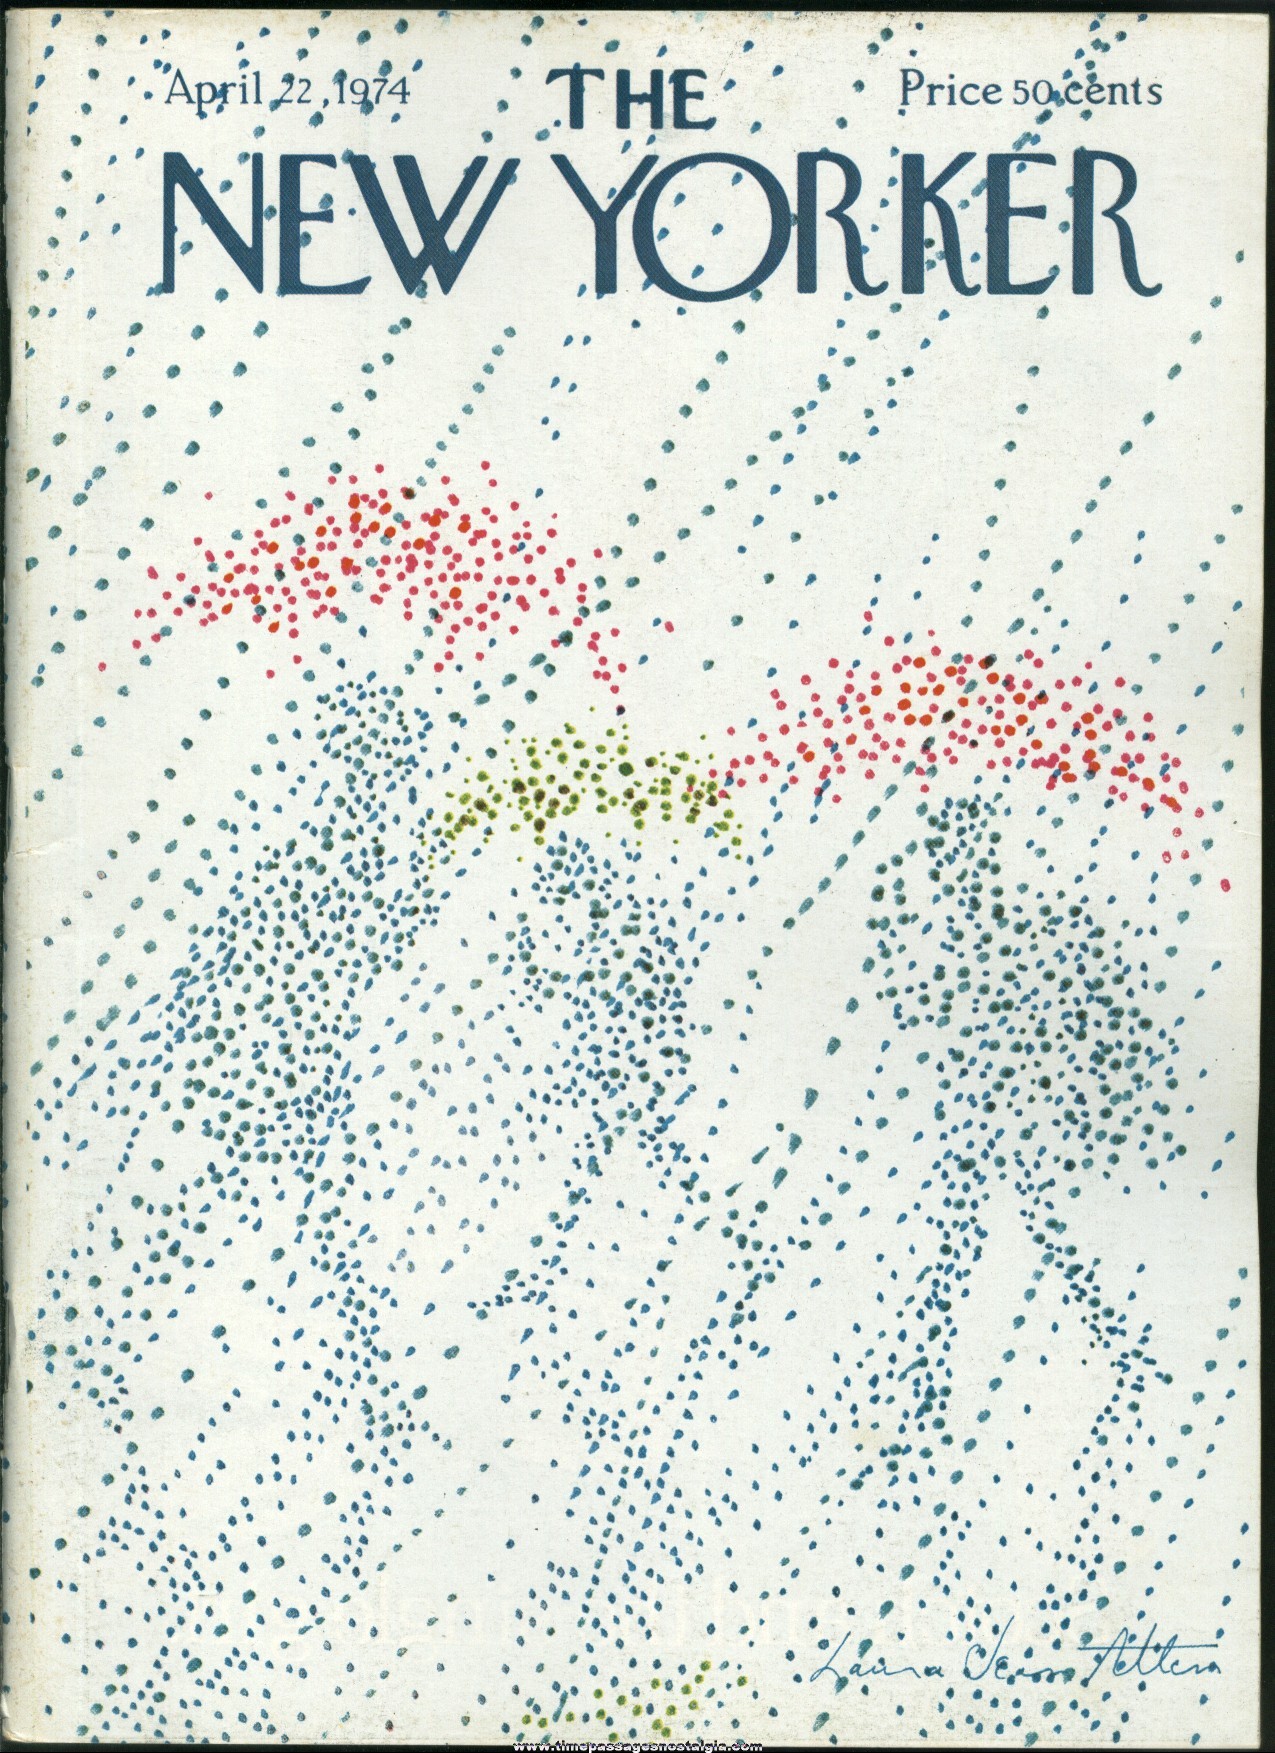 New Yorker Magazine - April 22, 1974 - Cover by Laura Jean Allen